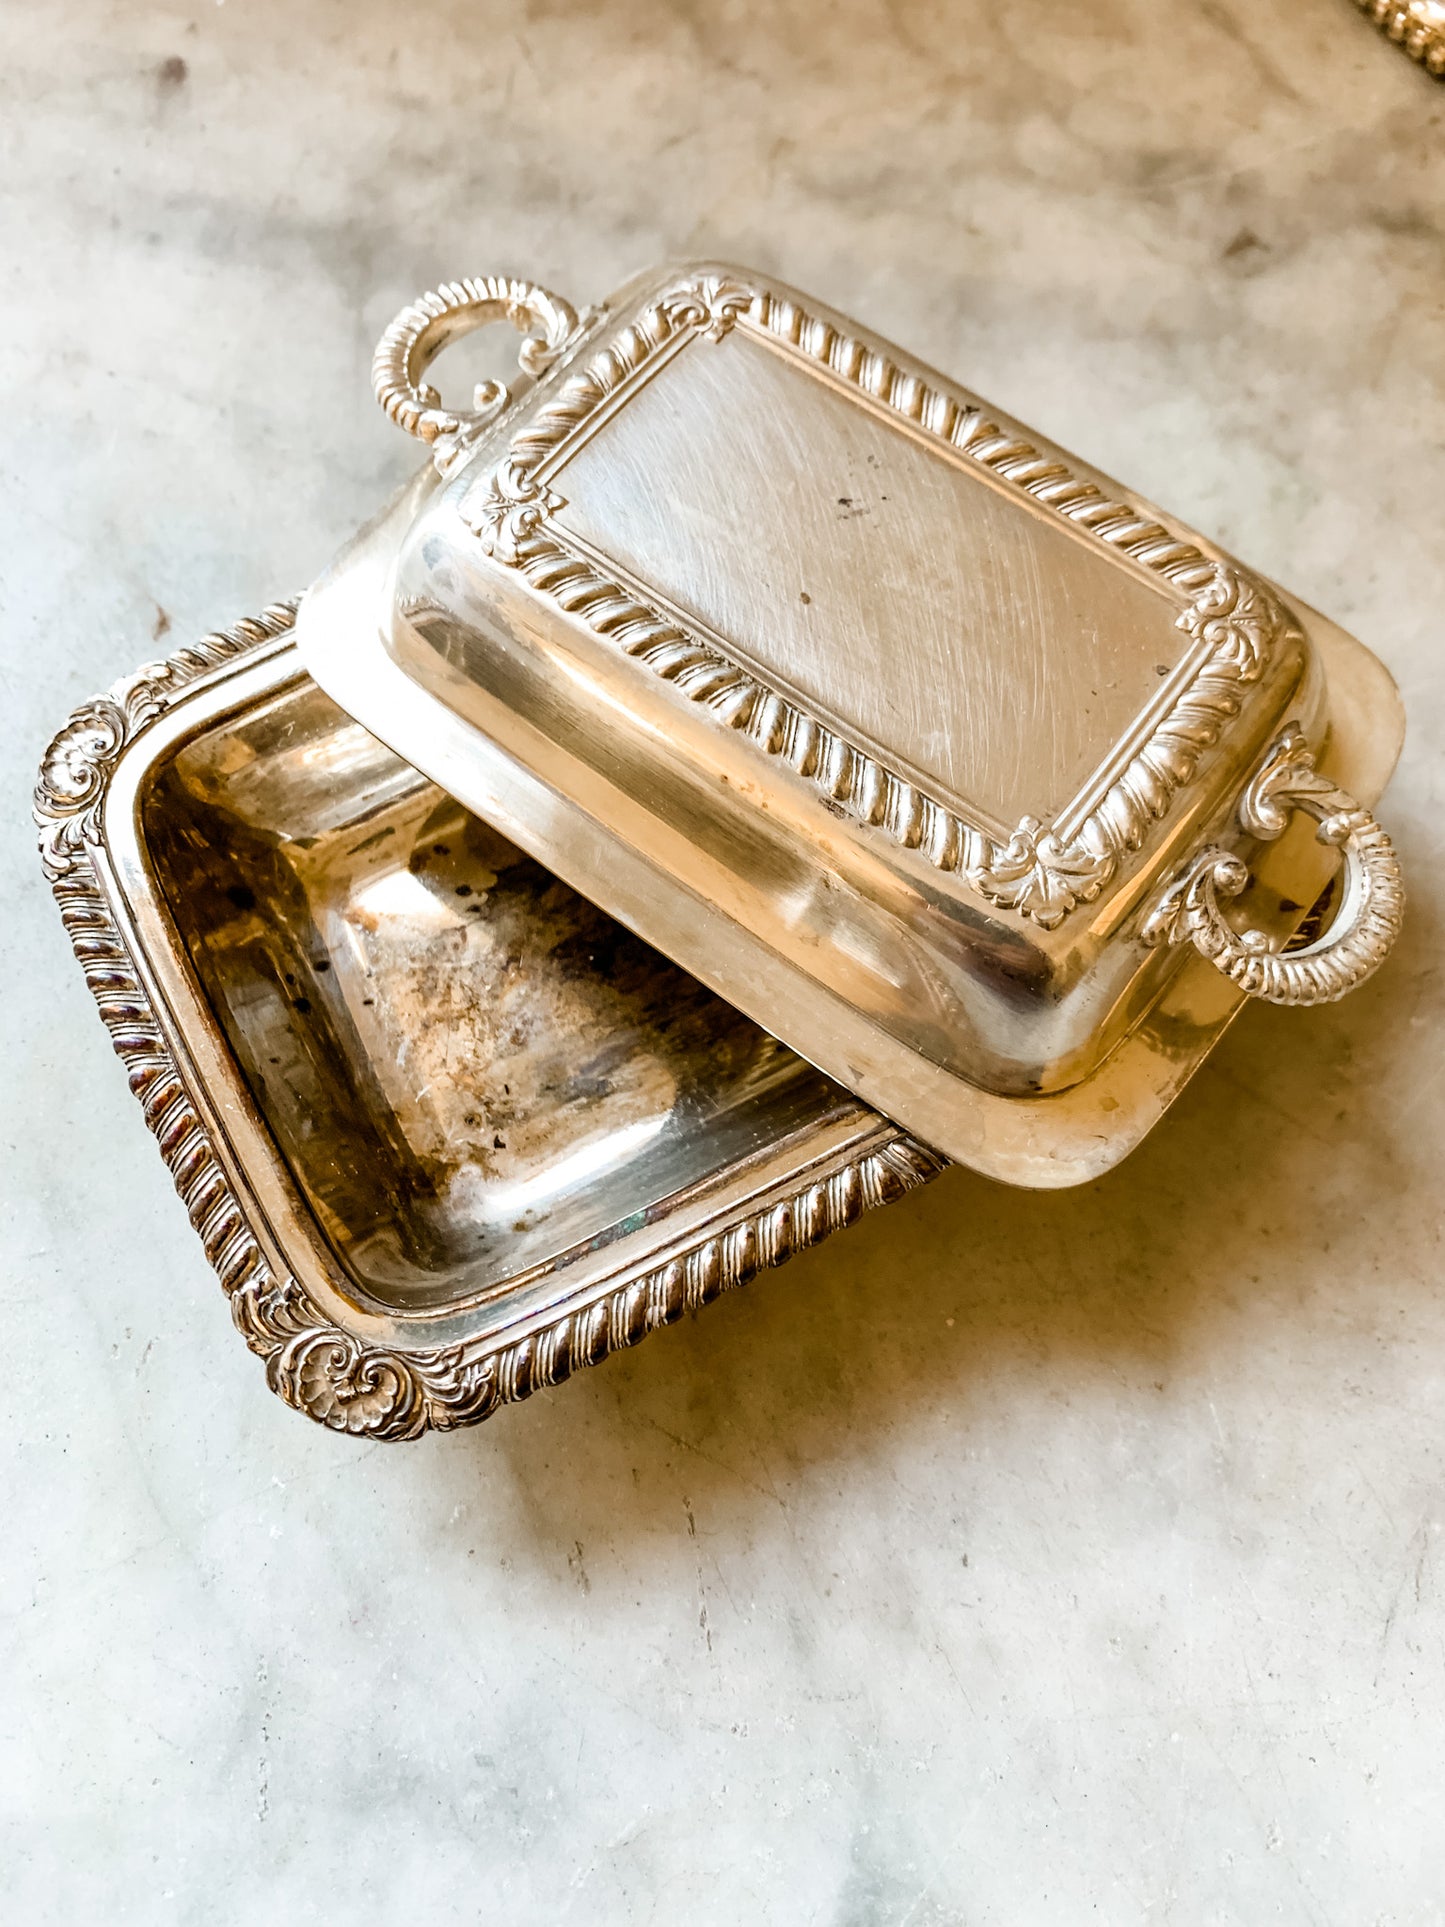 Darling Covered Silver Individual Butter Dish